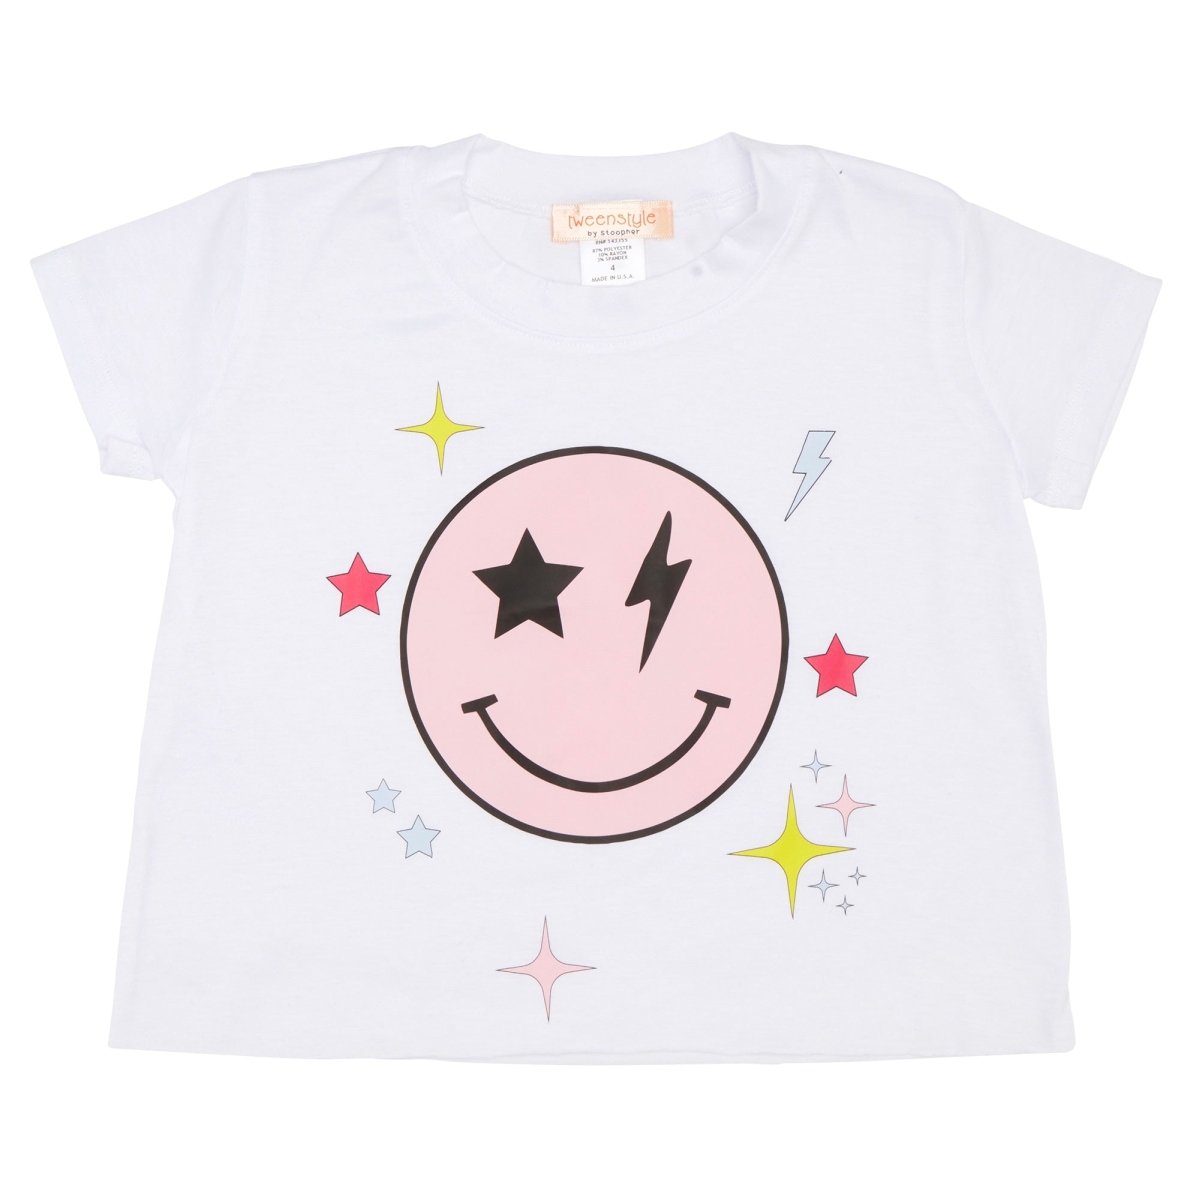 SMILEY FACE TSHIRT - SPARKLE BY STOOPHER